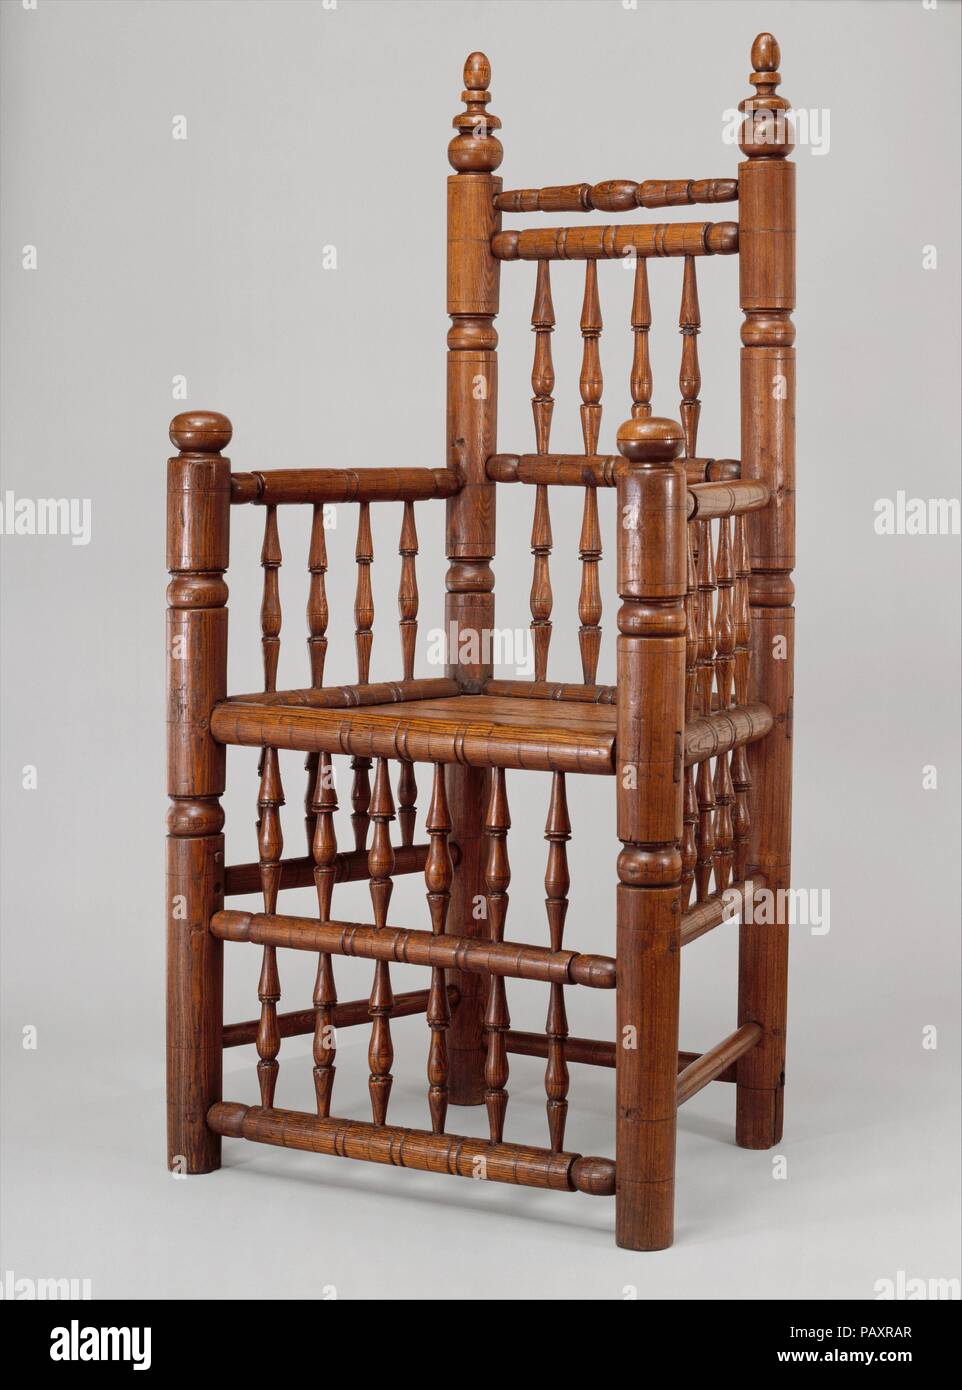 Spindle-back armchair. Culture: American. Dimensions: 44 3/4 x 23 1/2 x 15 3/4 in. (113.7 x 59.7 x 40 cm). Date: 1640-80.  The rarest and grandest of the early turned chairs are those with rows of spindles below the seat as well as above it. Although its boxlike form may look simple at first glance, this chair is a complex composition with subtle variations in the shaping of the rungs and in the spacing of its horizontal and vertical members. Museum: Metropolitan Museum of Art, New York, USA. Stock Photo